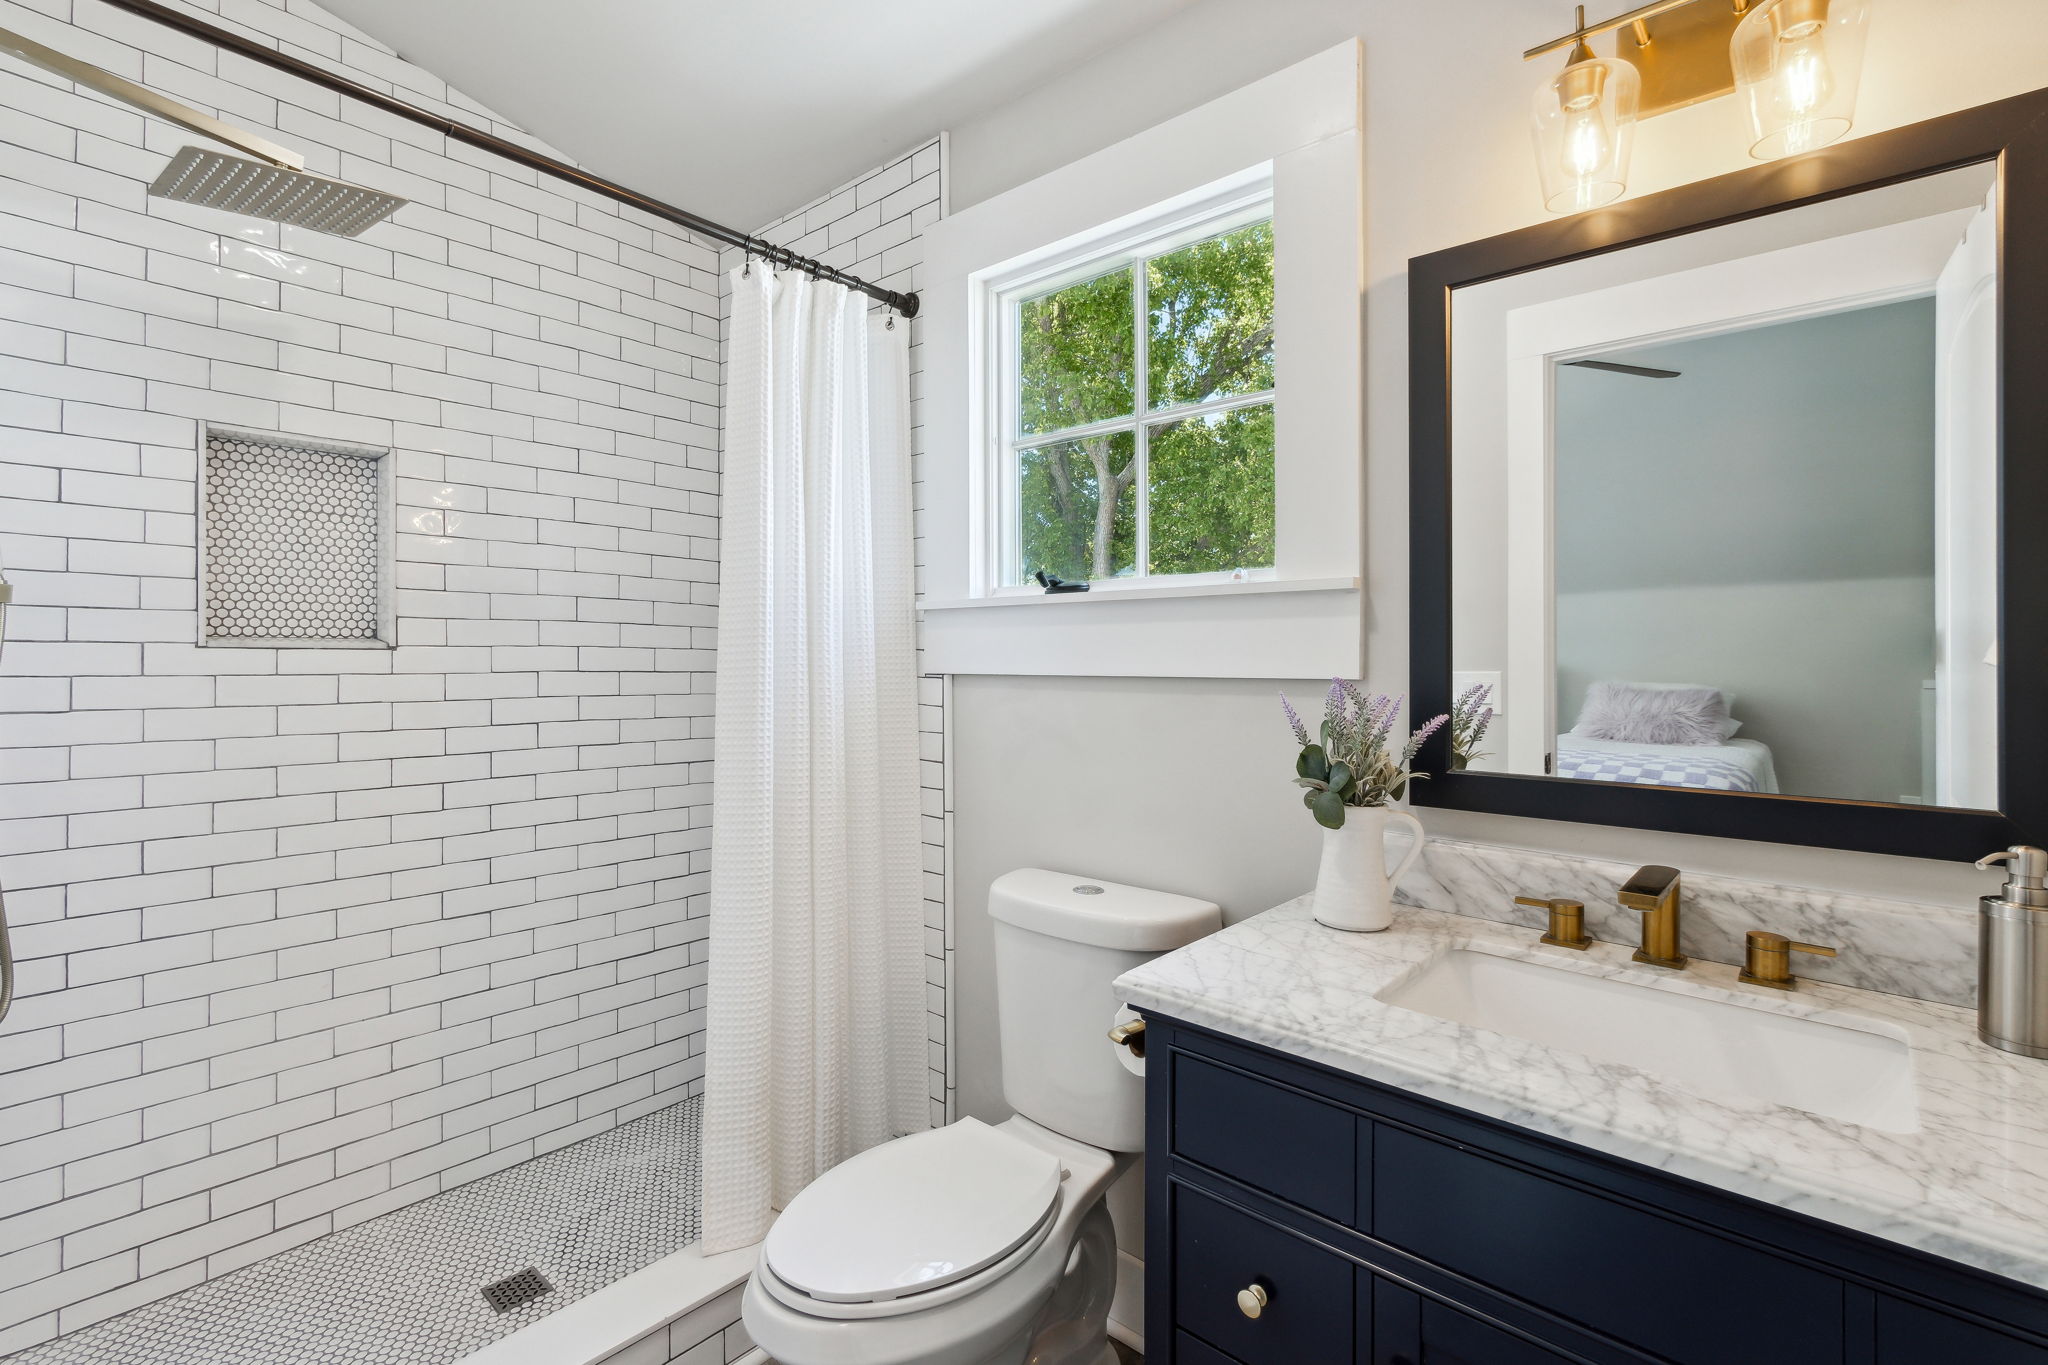 The ensuite bath was completely renovated in 2020